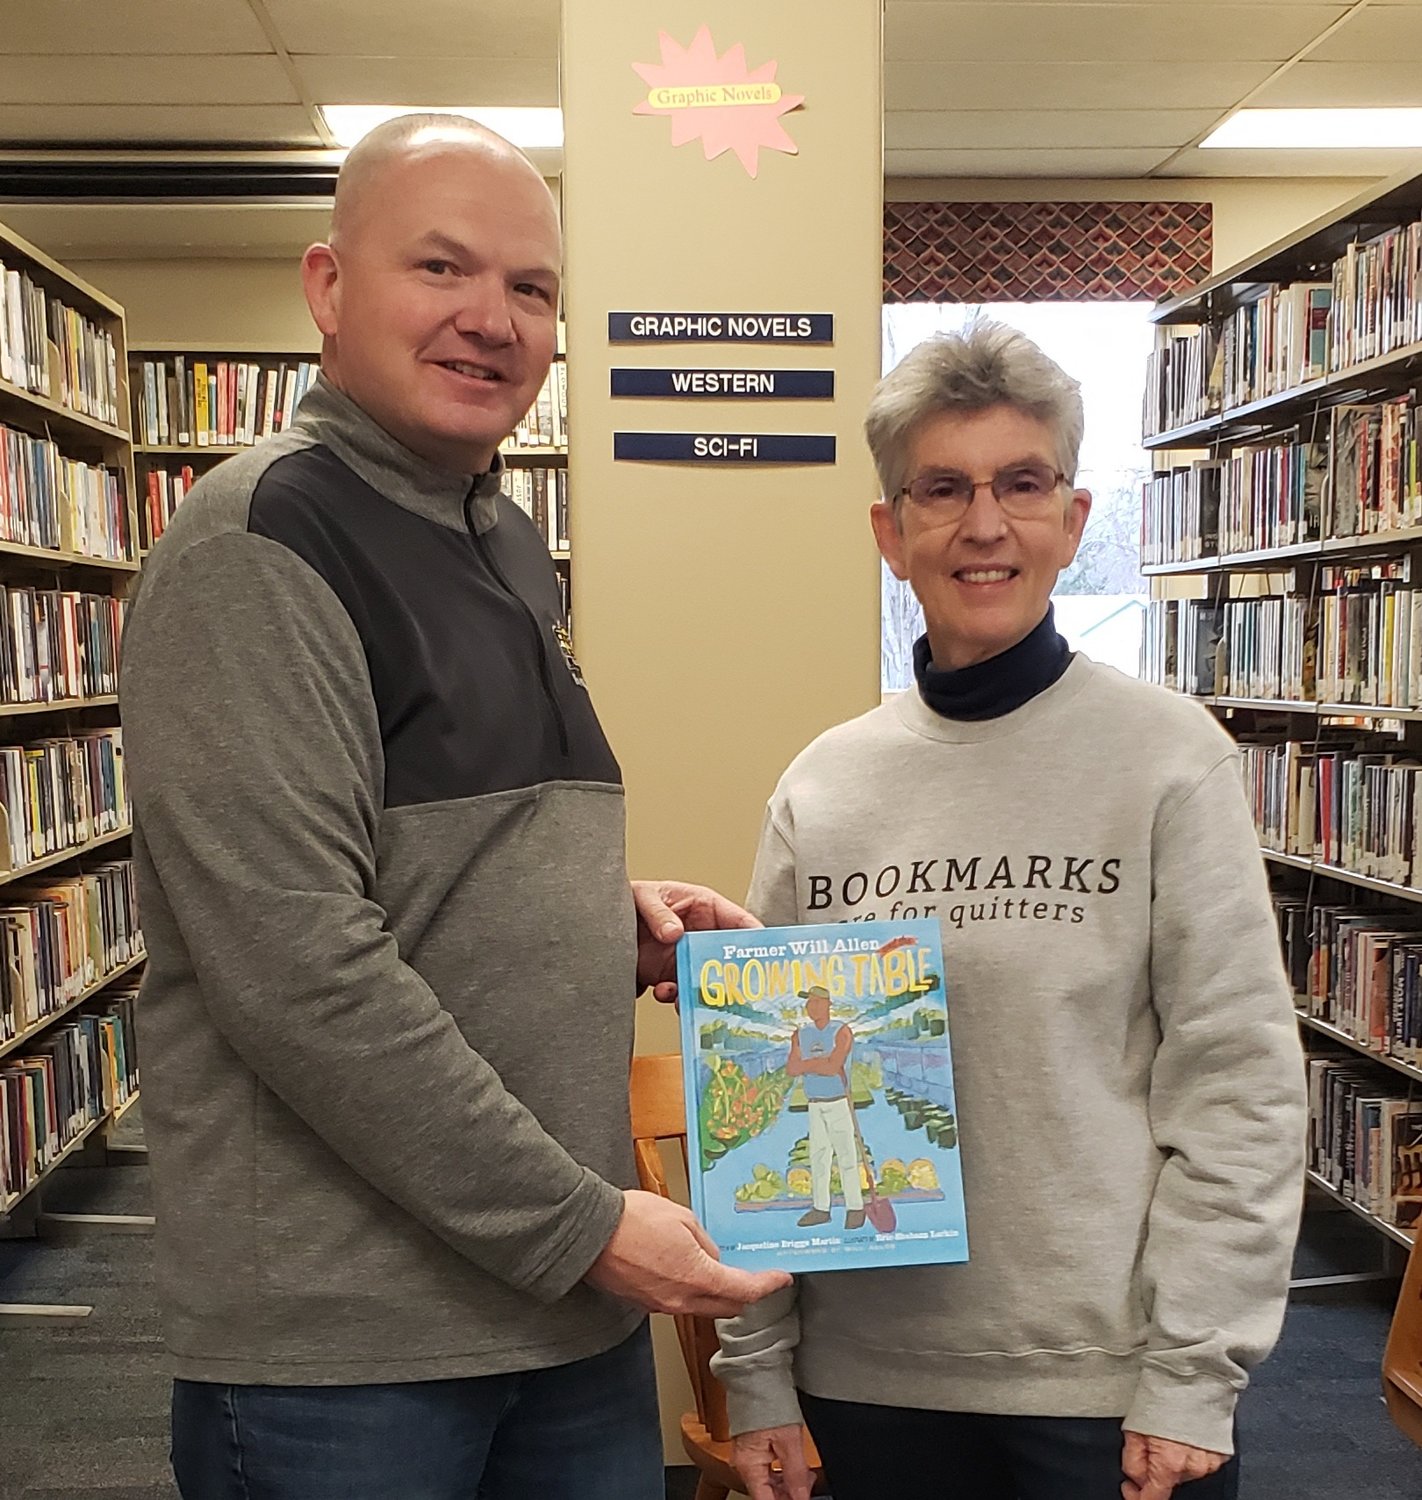 CELEBRATING AGRICULTURE — John Wagner of New York Farm Bureau, left, presents this year’s Agriculture Literacy Book of the year "Will Allen and the Growing Table" on behalf of the Oneida County Farm Bureau to Mary Kay Junglen, director of the Sherrill-Kenwood Free Library.